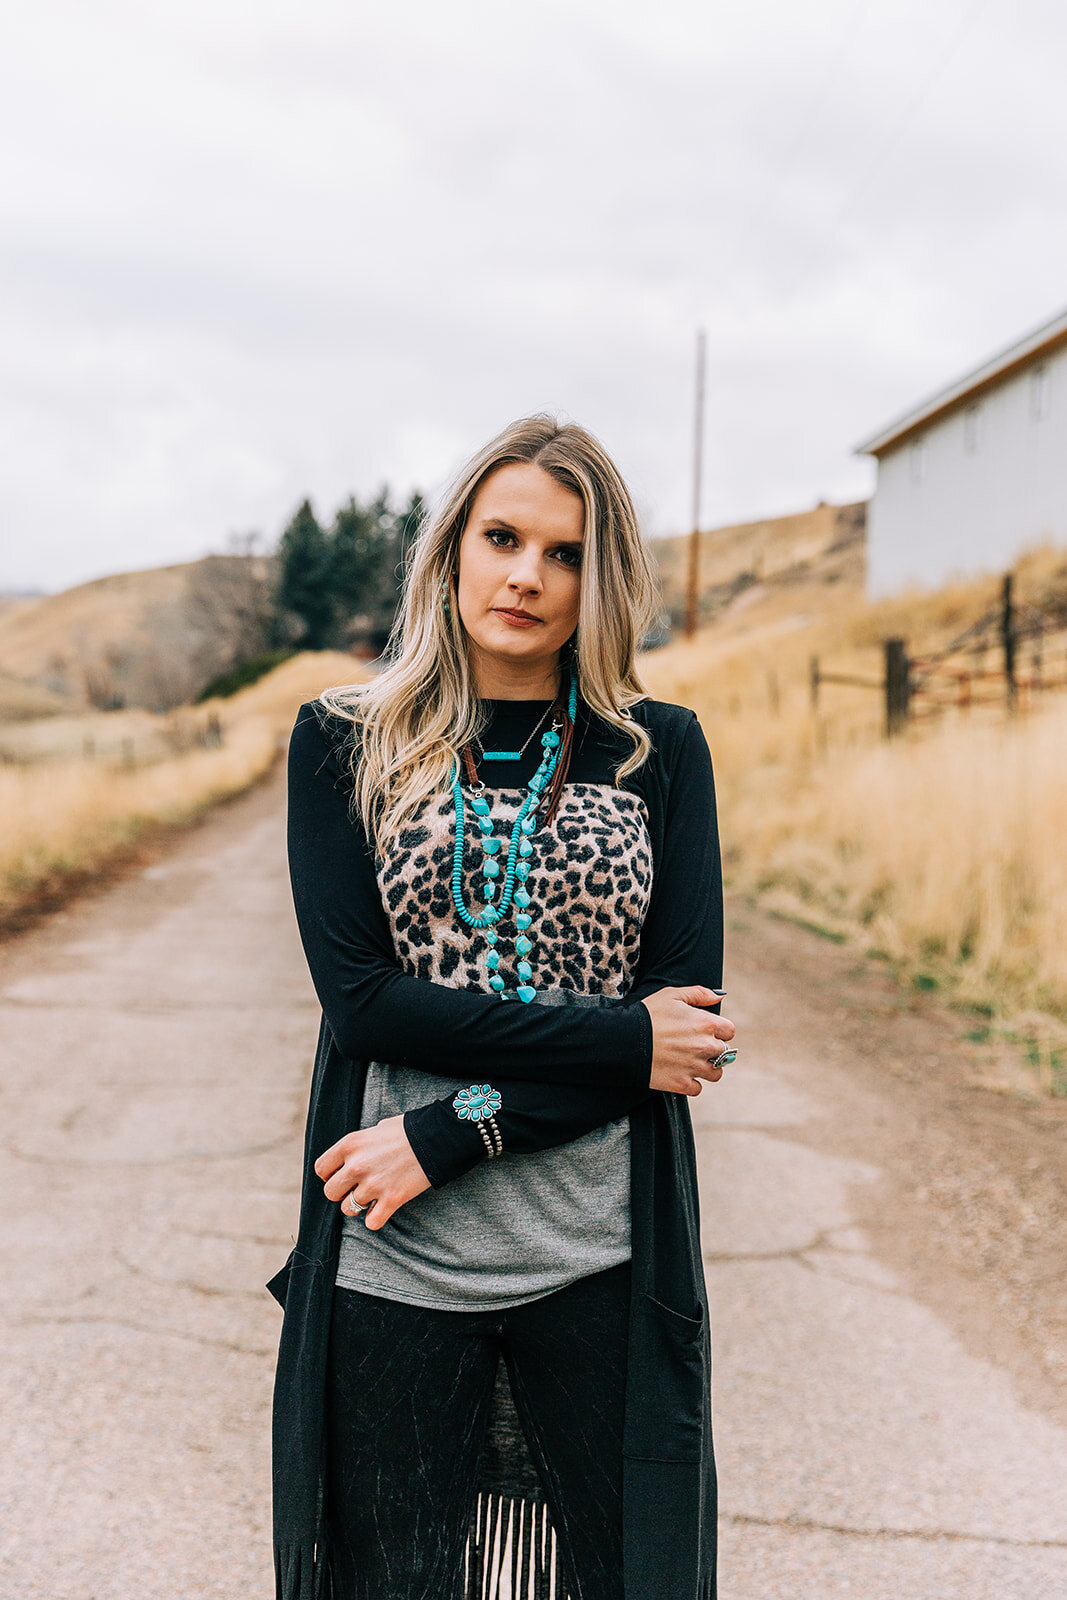  black duster cheetah print color block shirt statement jewelry teal stones hairstyles long hairstyles hair and makeup inspiration country style professional photographers in utah commercial photographers in utah horses wild rag boutique commercial p